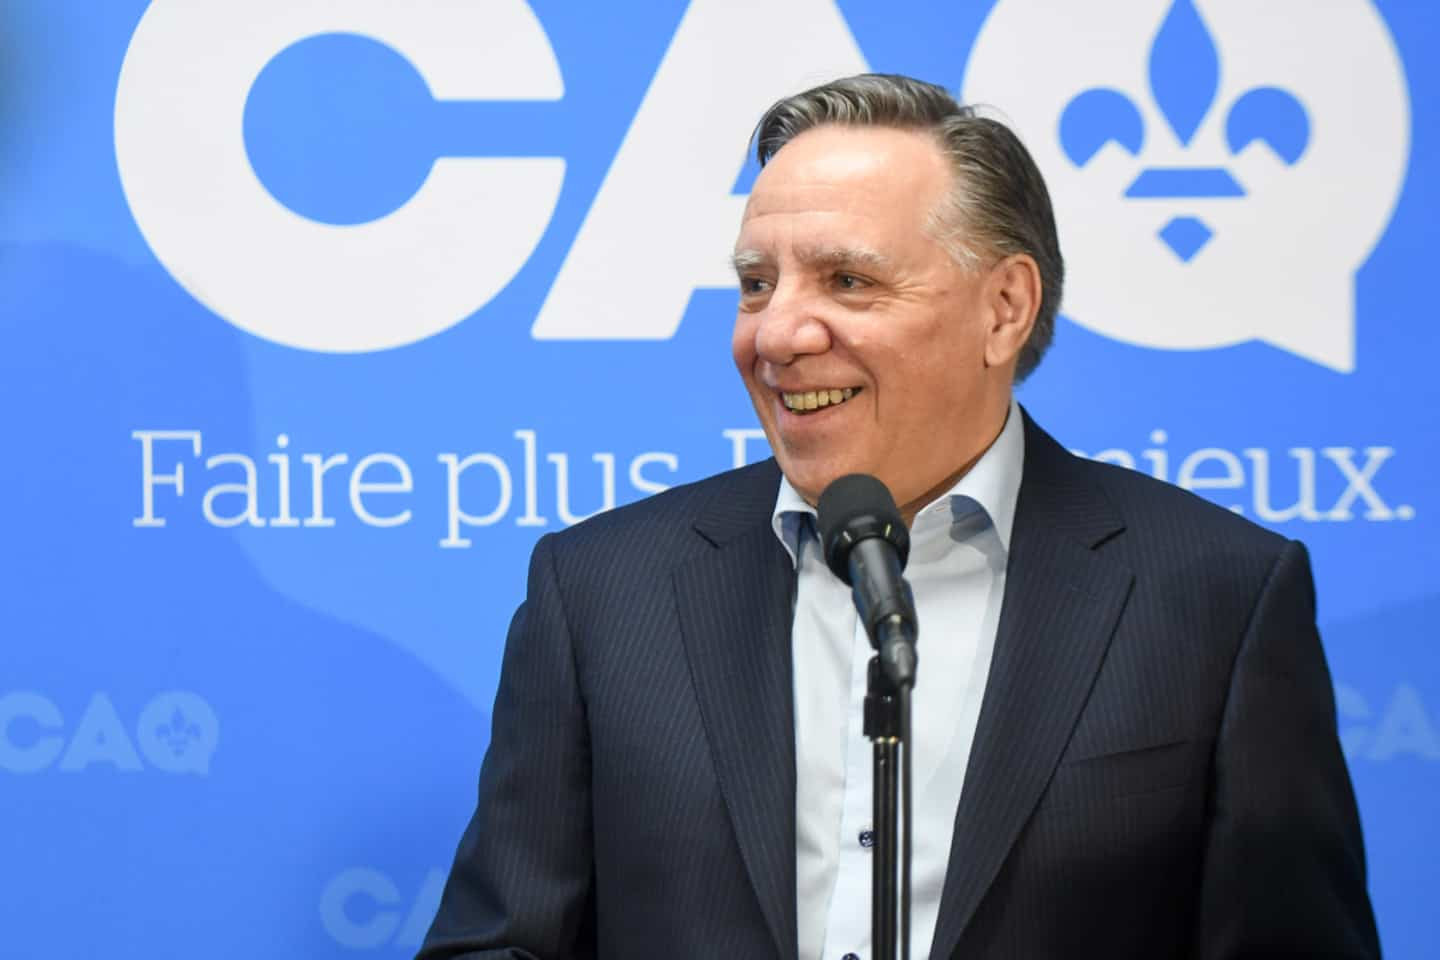 Immigration powers: “a question of survival for our nation”, points out Legault